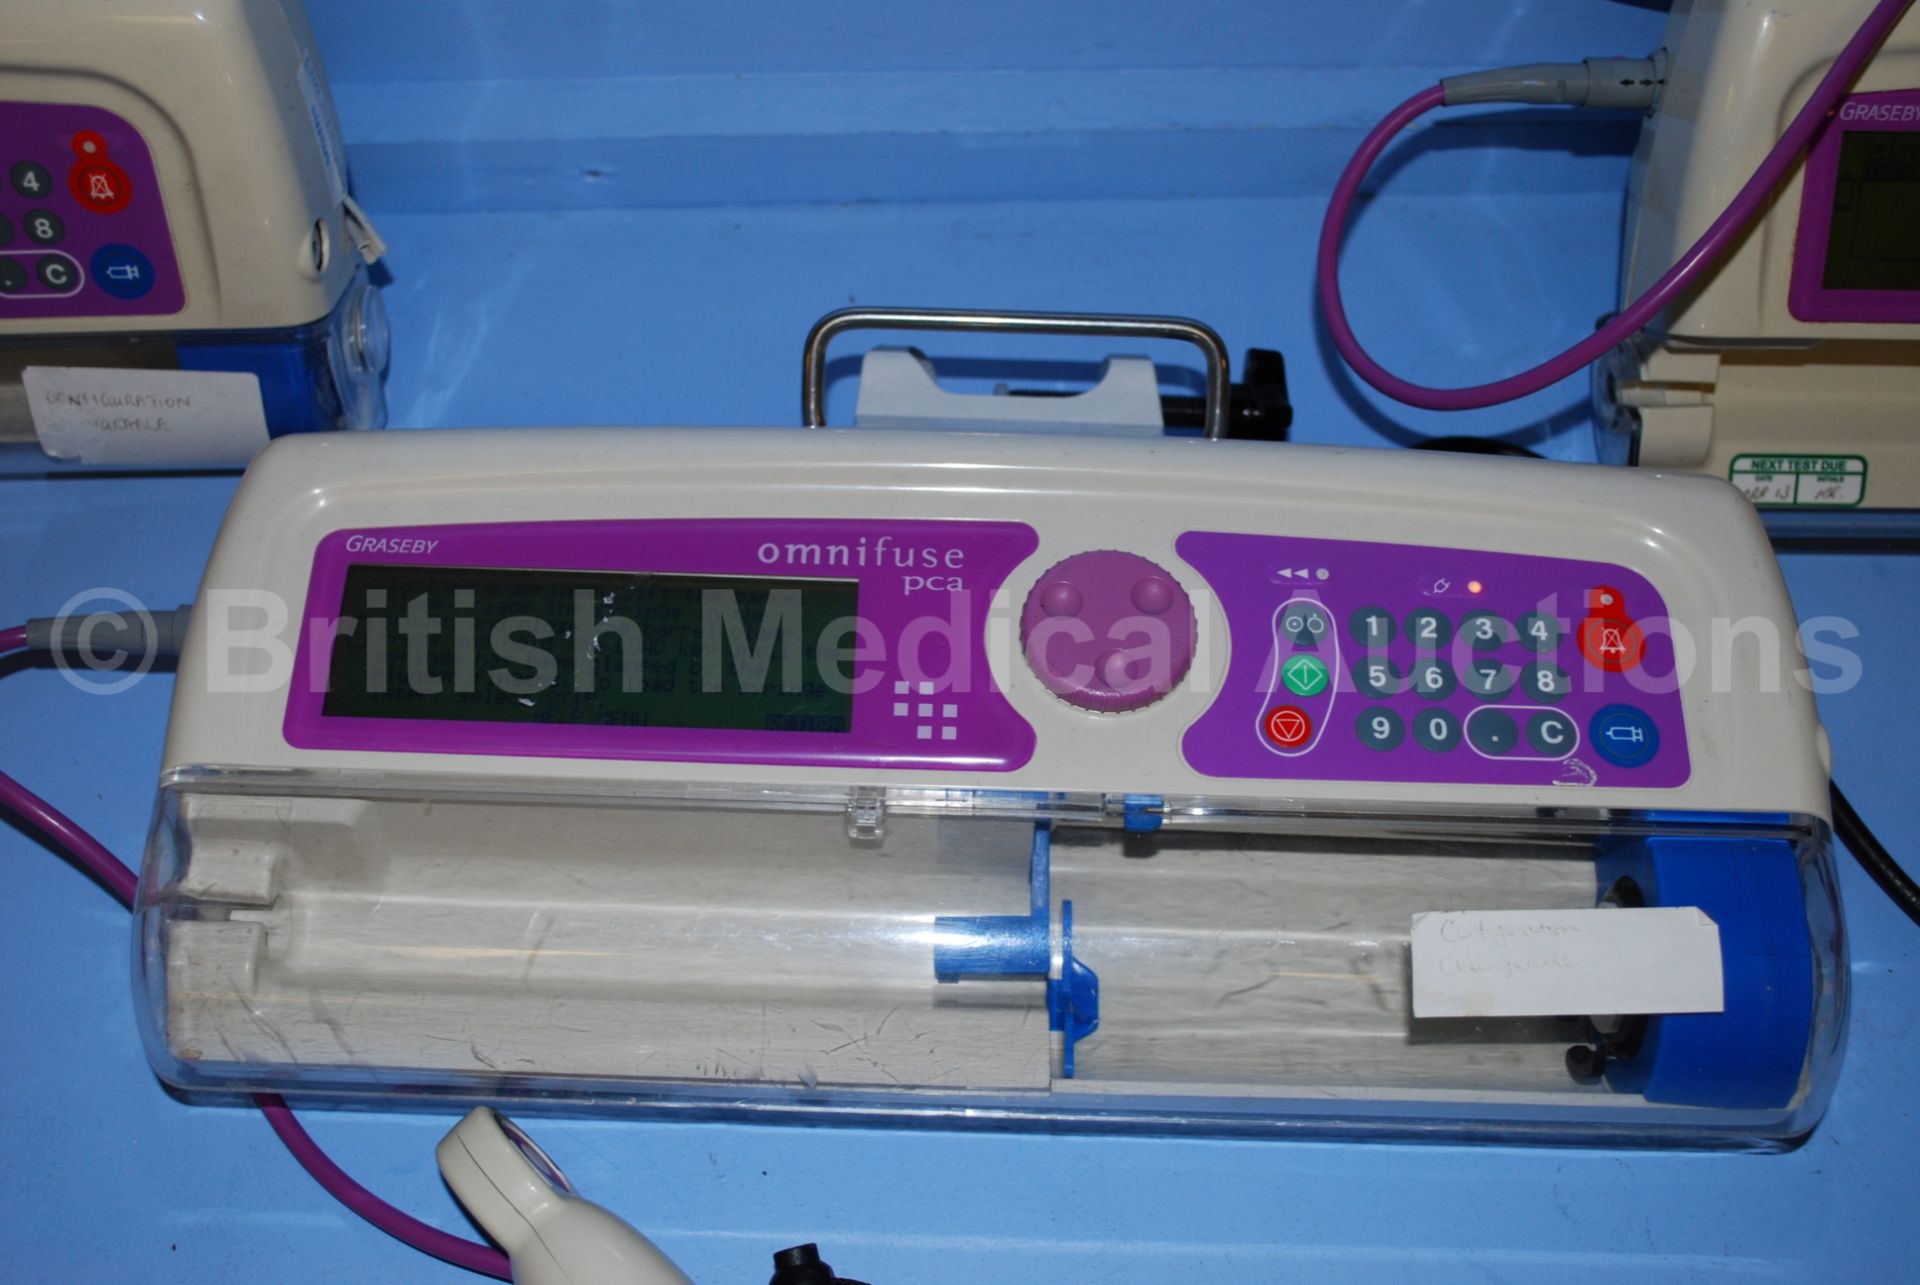 3 x Graseby Omnifuse pca Syringe Pumps with pca Co - Image 4 of 4